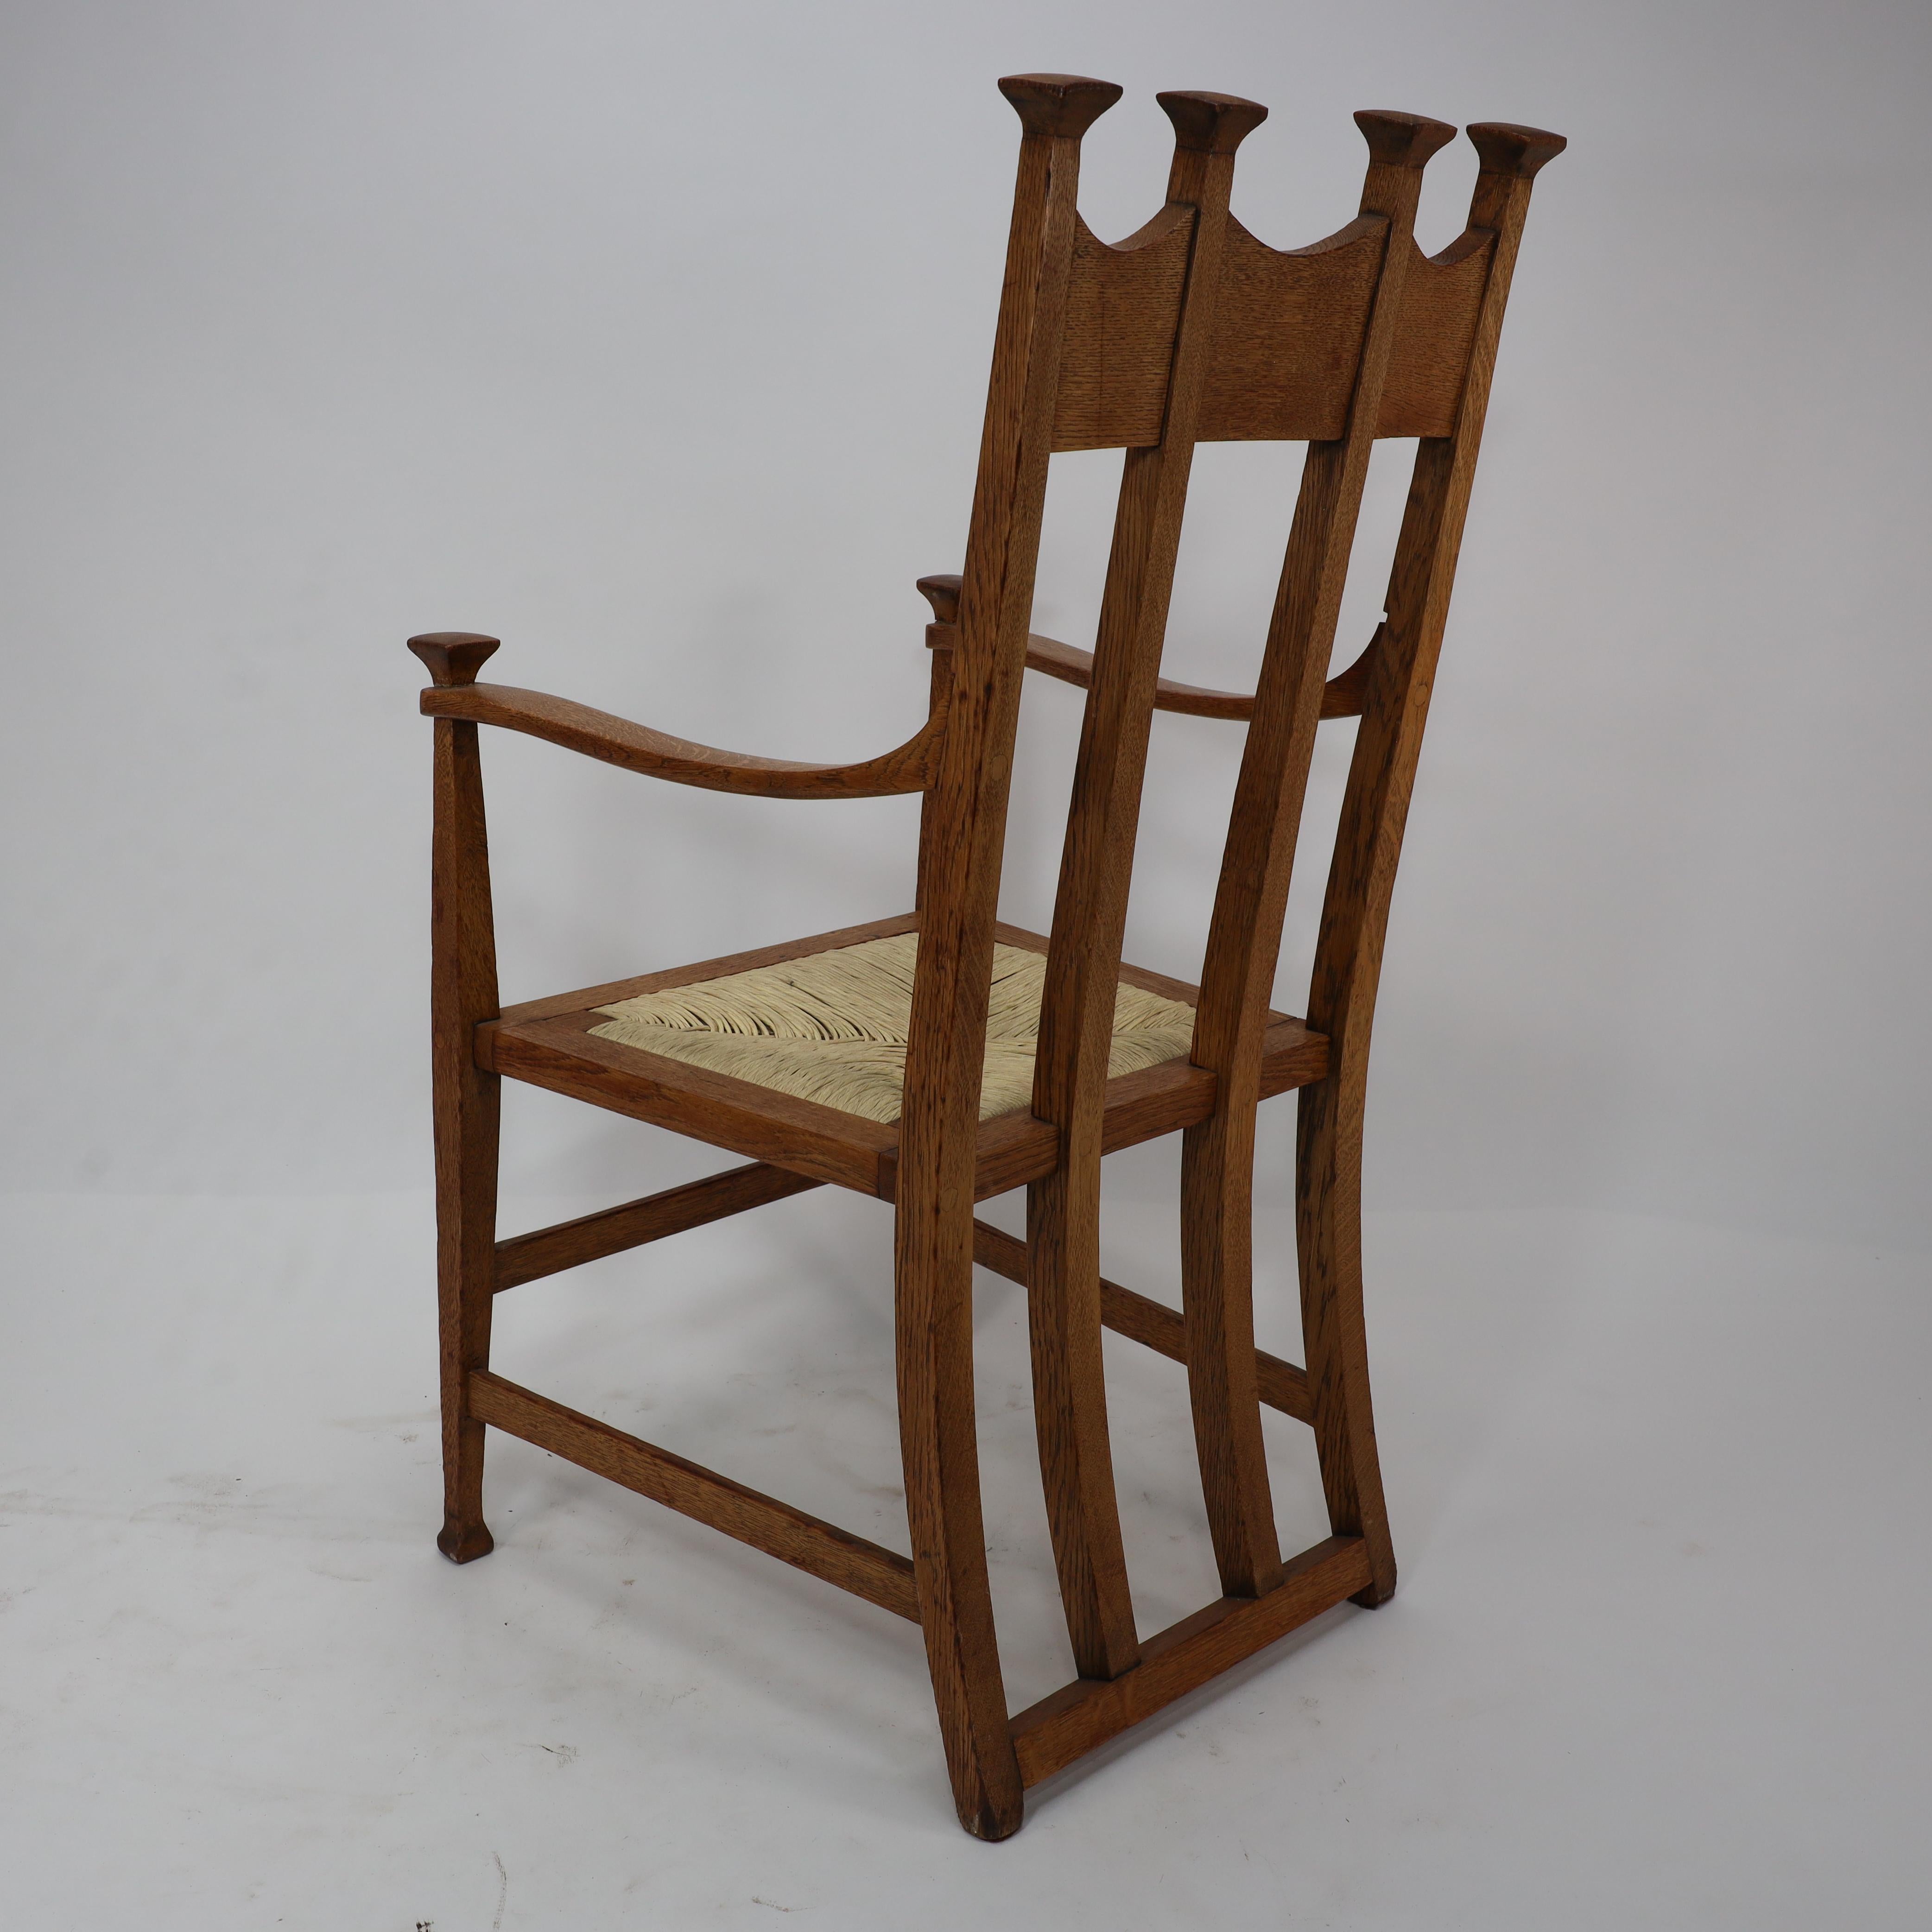 J S Henry Arts & Crafts oak dining chair with throne like caps & a sweeping back For Sale 6